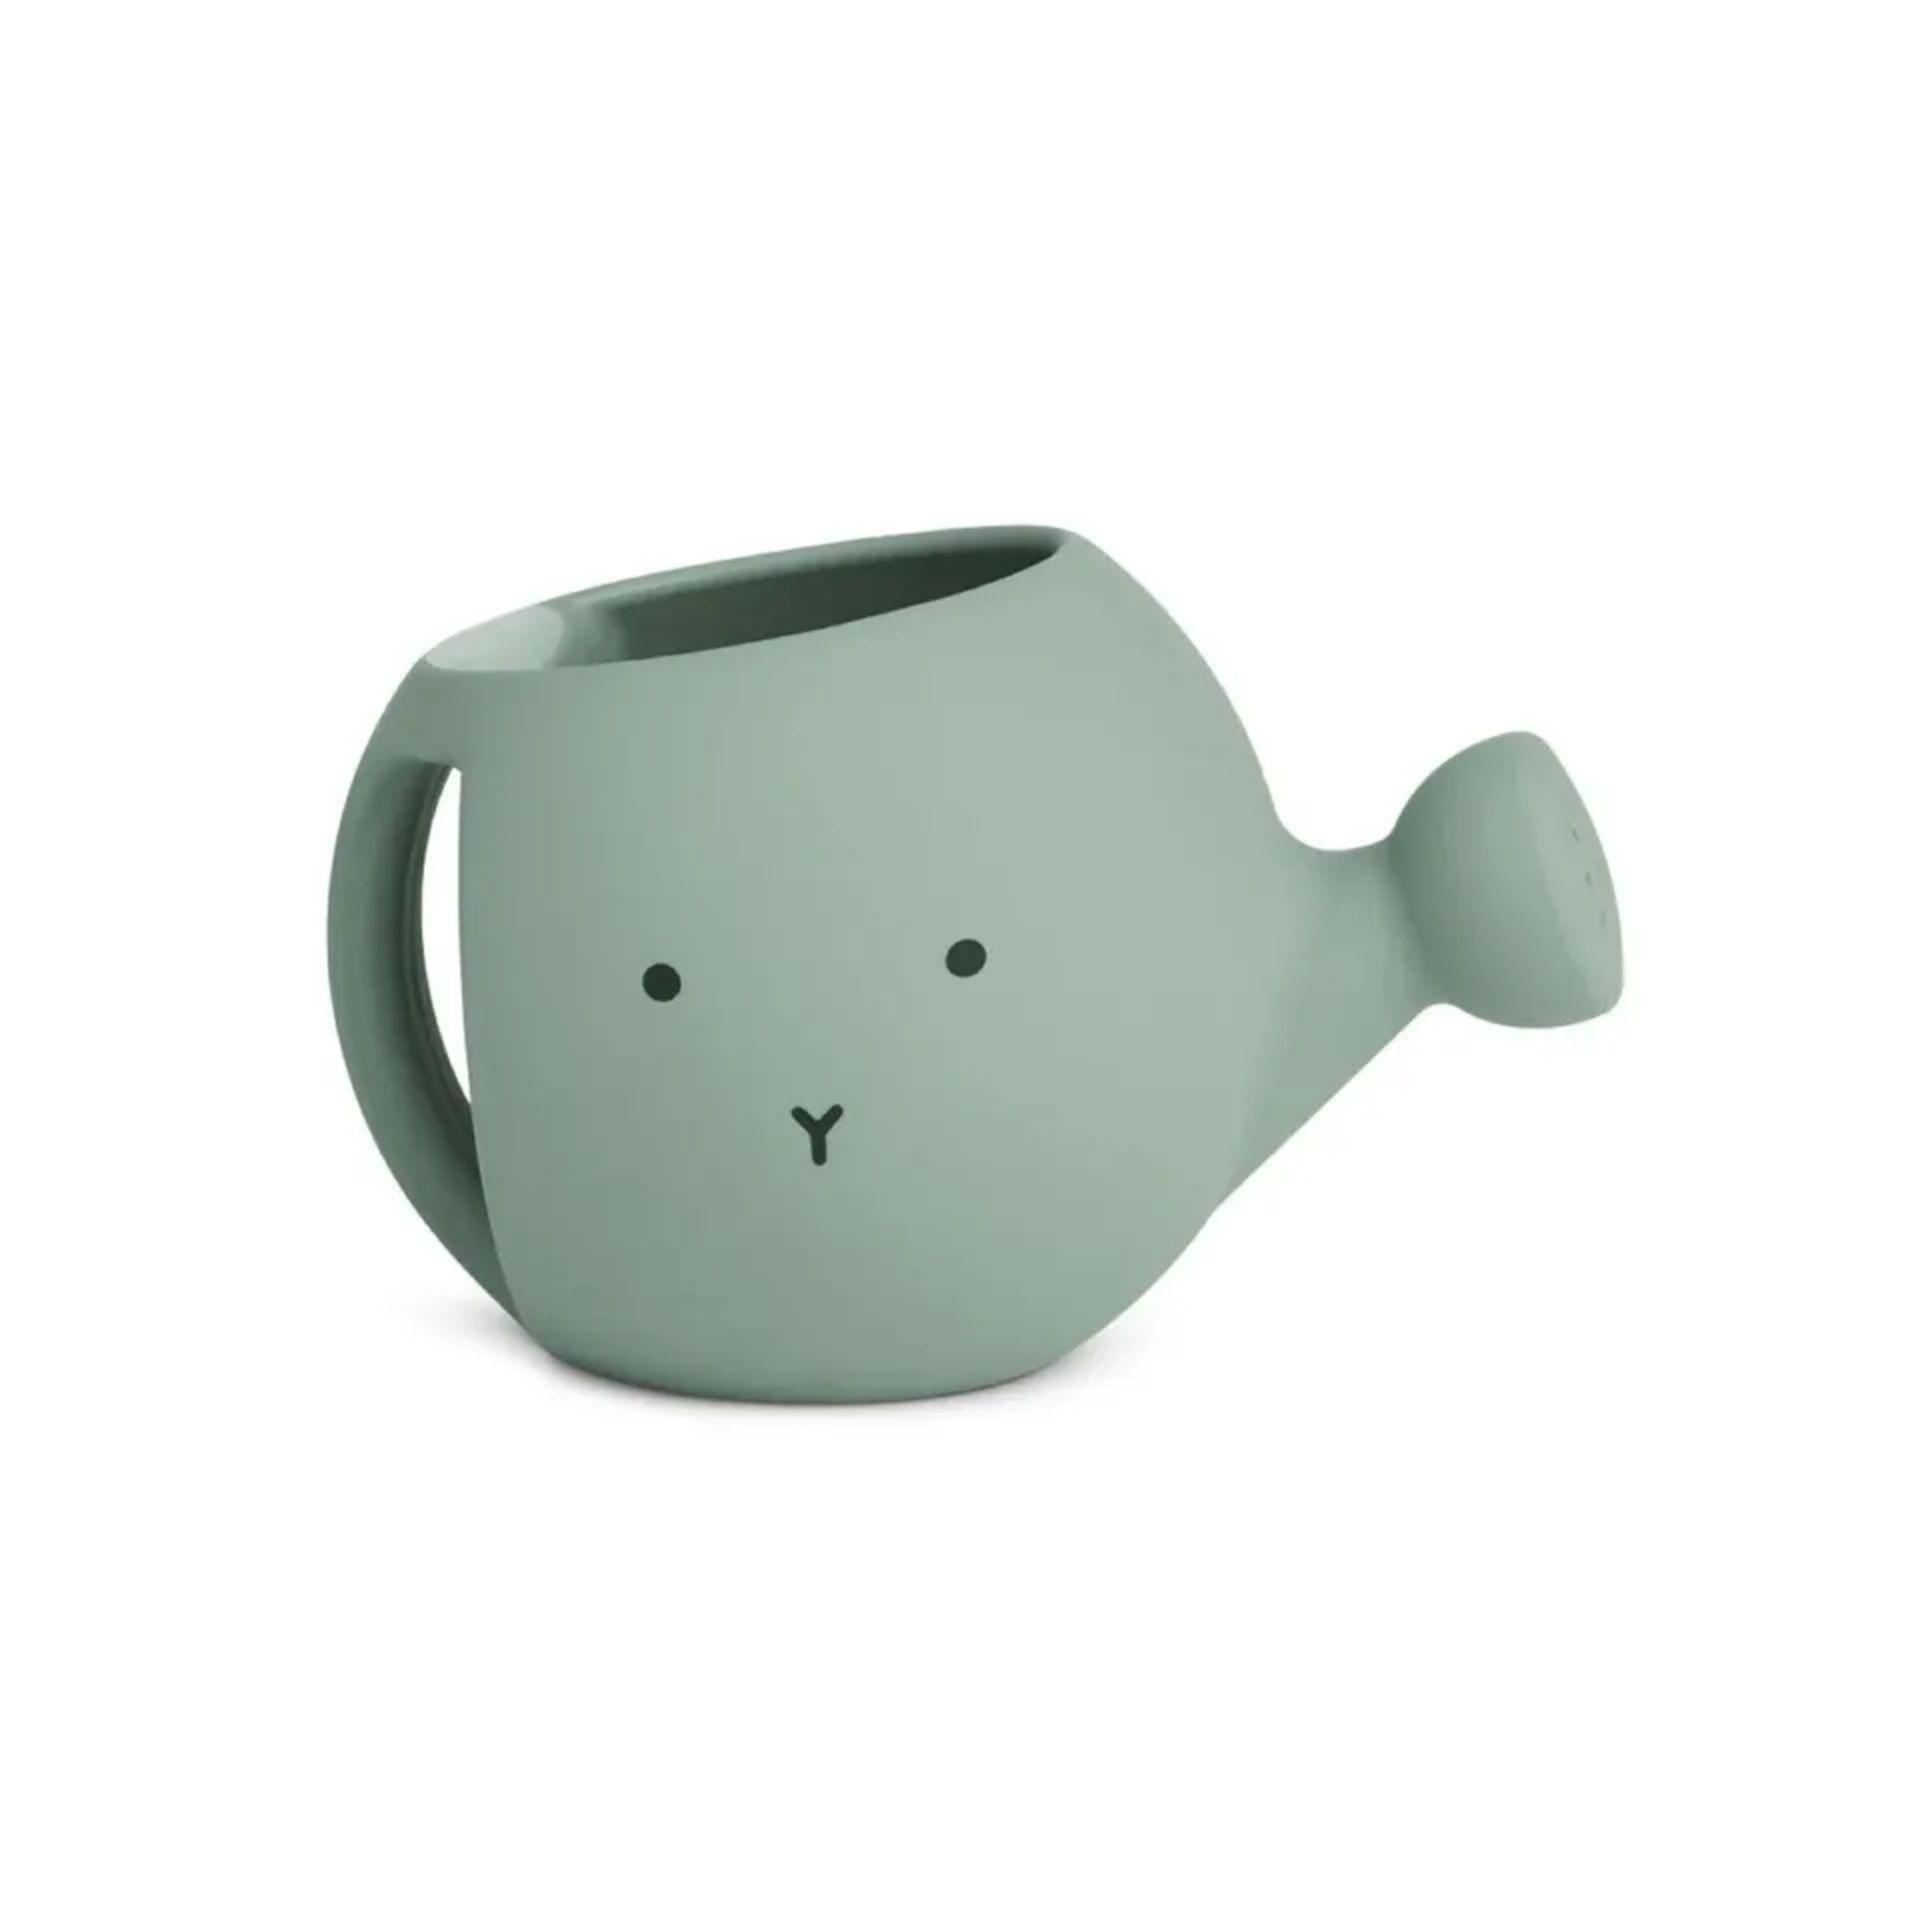 5x Liewood Lyon Watering Can, Assorted - Image 2 of 2